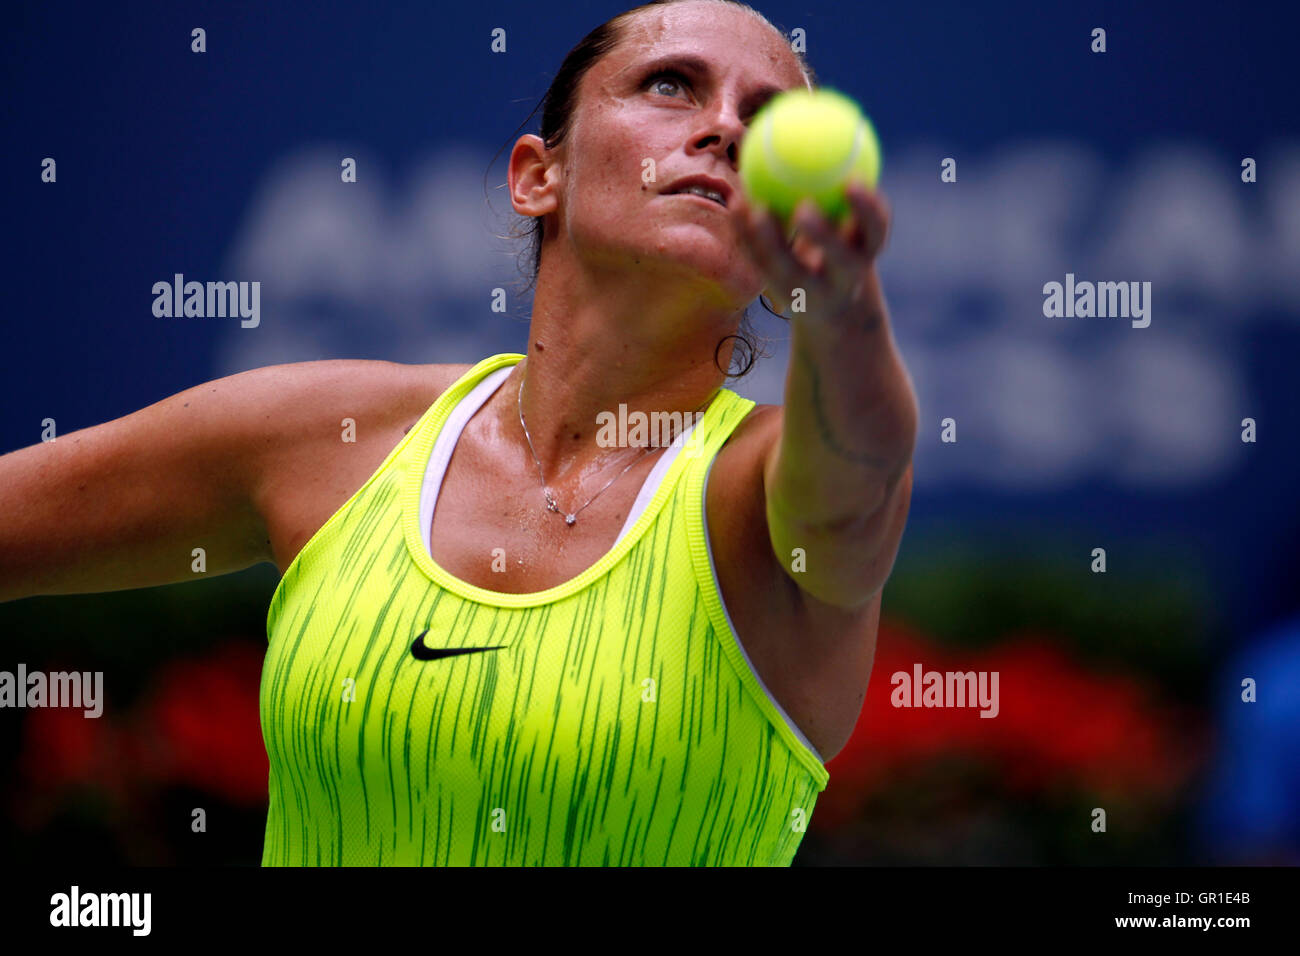 New York, USA. 6th September, 2016. Number 7 seed, Roberta Vinci of Italy serving during her quarter final match against Number 2 seed, Angelique Kerber of Germany at the United States Open Tennis Championships at Flushing Meadows, New York on Tuesday, September 6th.   Kerber won the match 7-5, 6-0 Credit:  Adam Stoltman/Alamy Live News Stock Photo